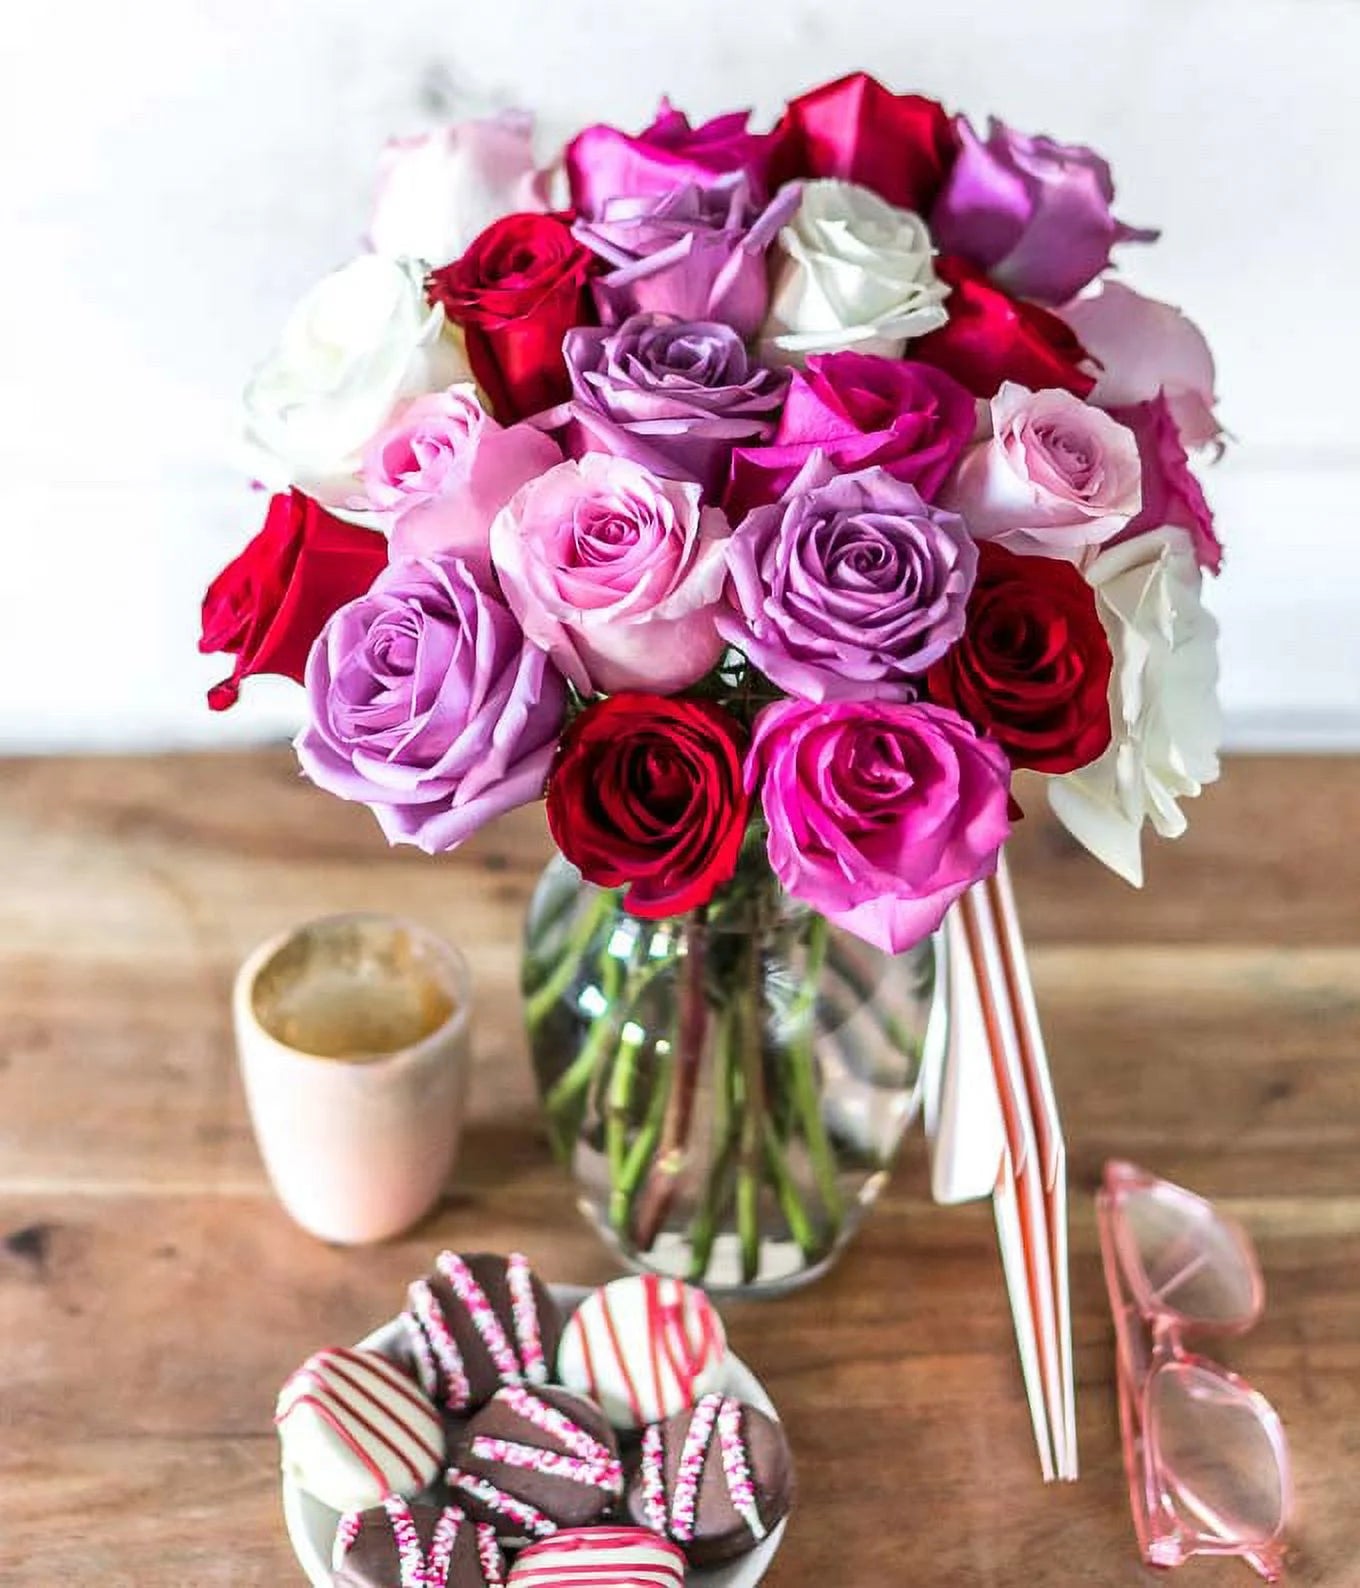 - Two Dozen Romantic Roses with Glass Vase (Fresh Flowers) Birthday, Anniversary, Get Well, Sympathy, Congratulations, Thank You